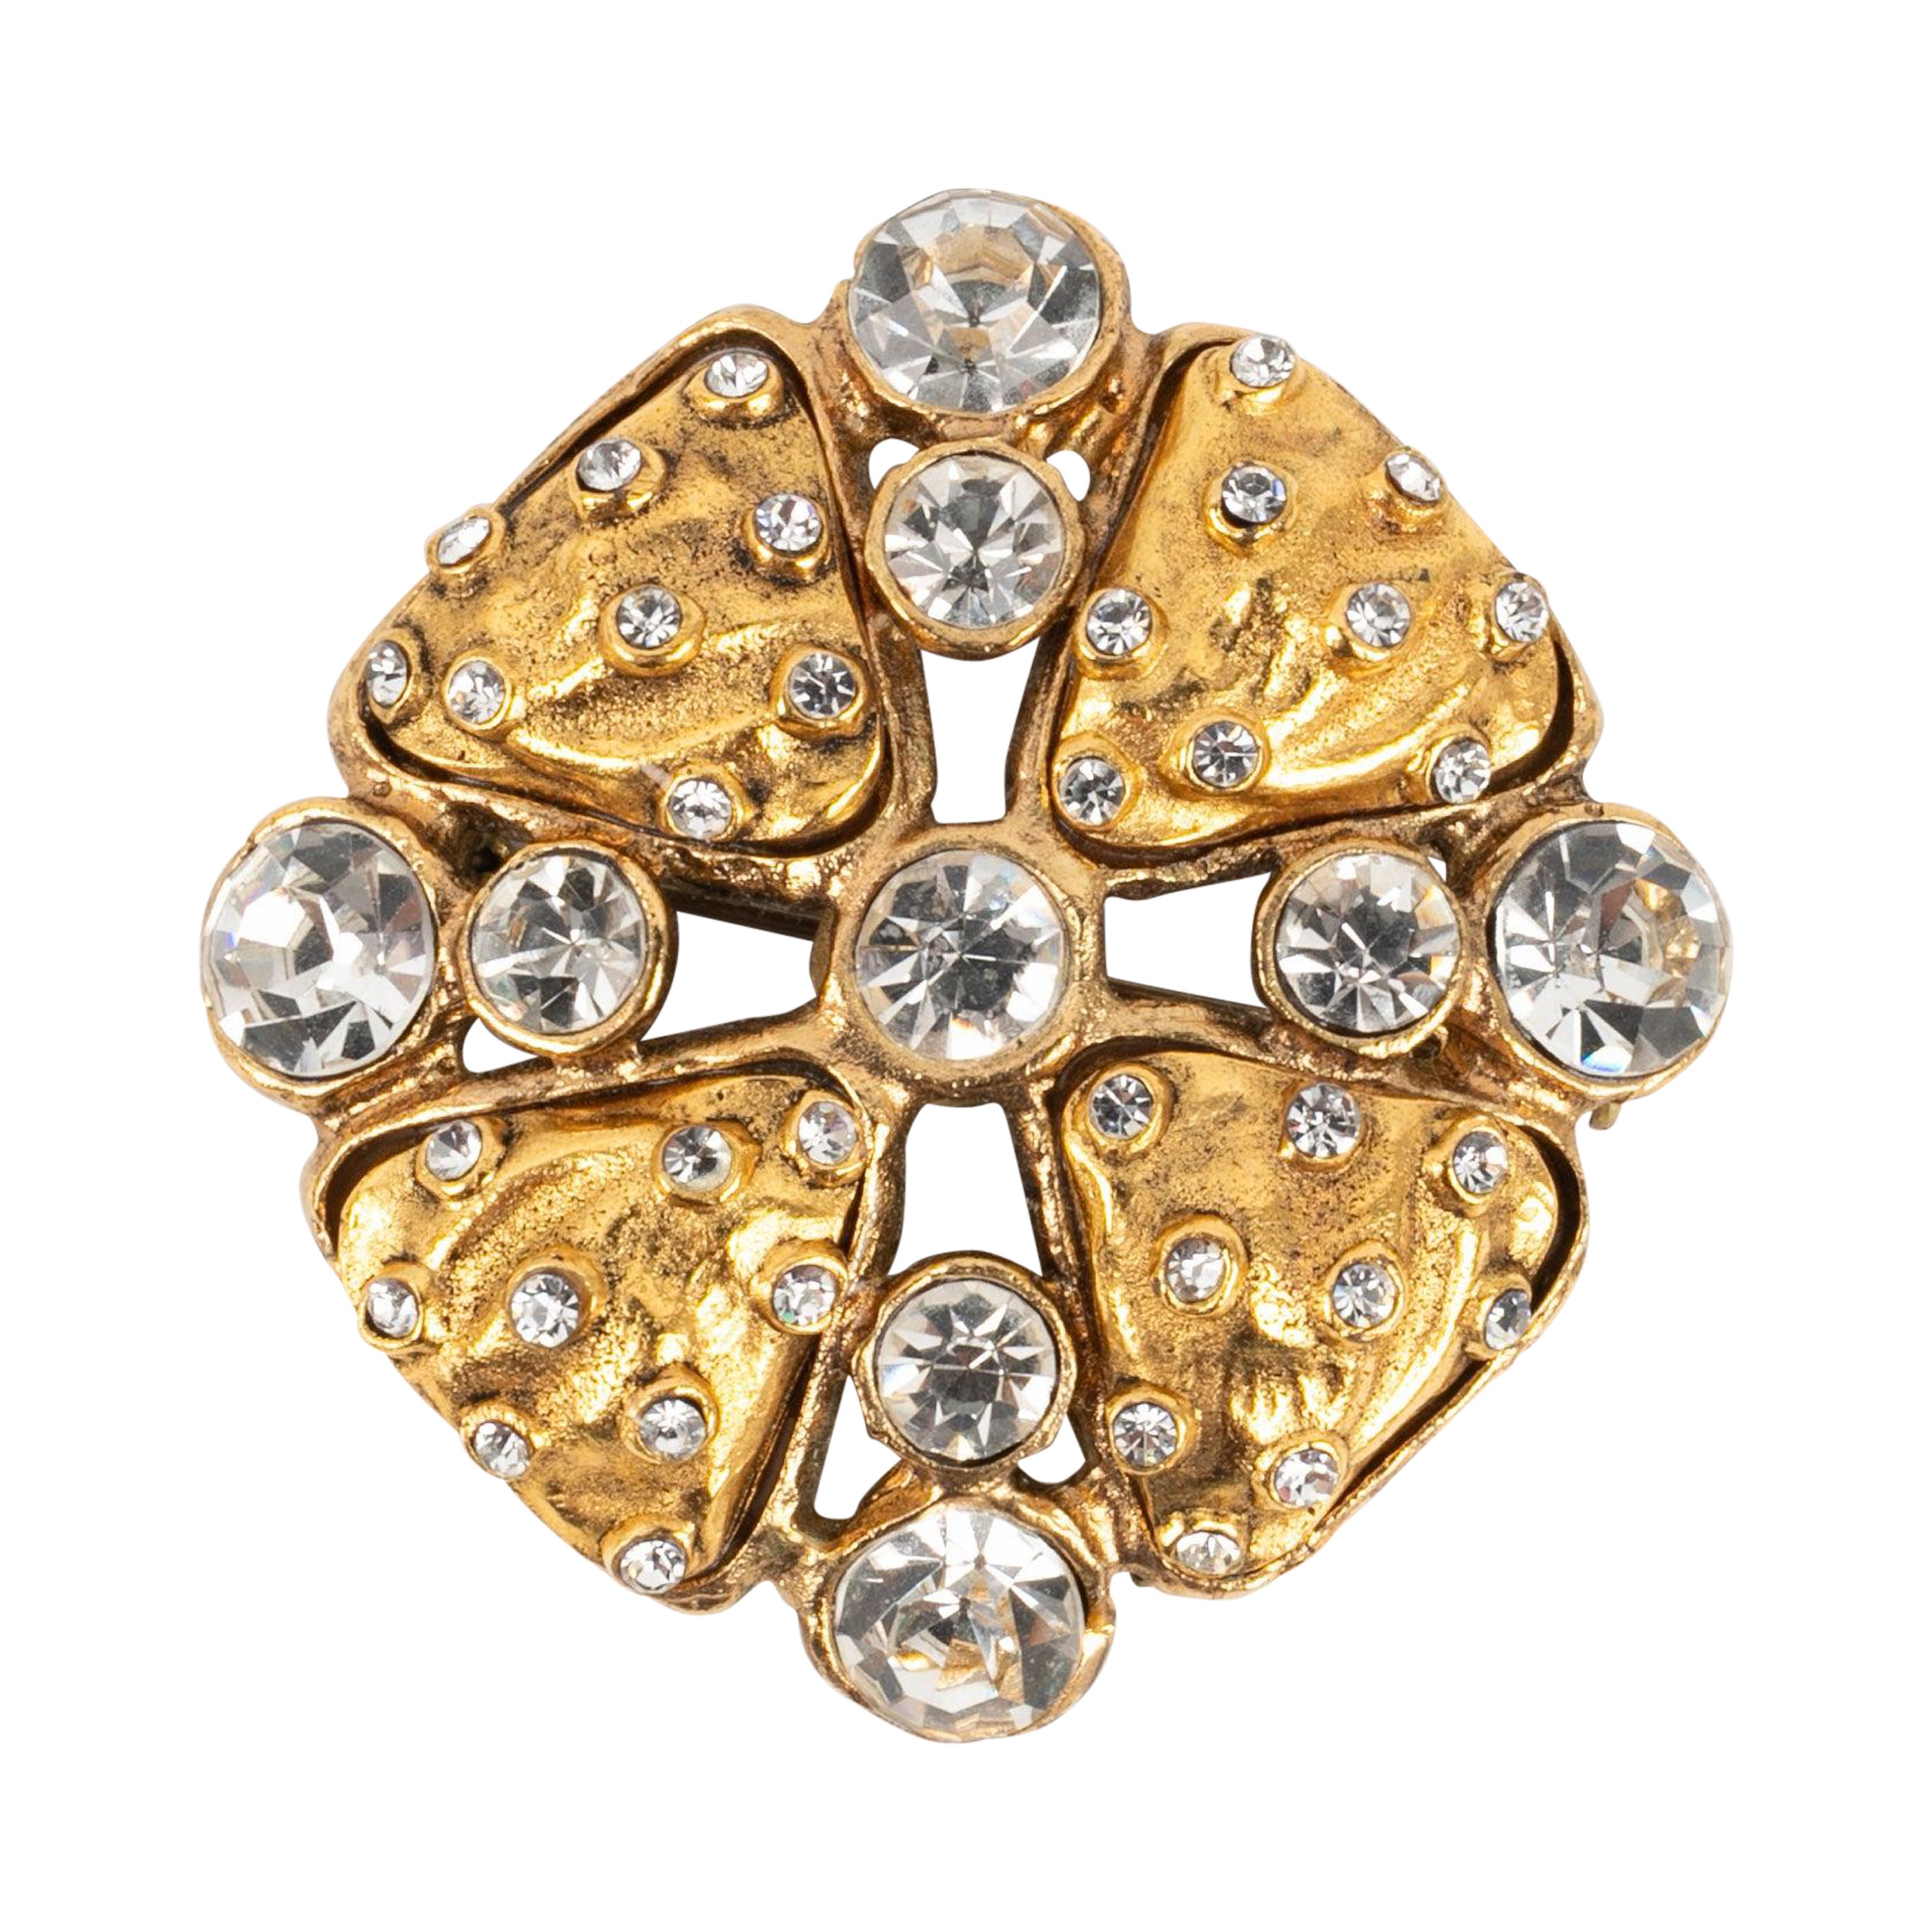 Chanel Byzantine Brooch in Gold-Plated Metal, 1990s